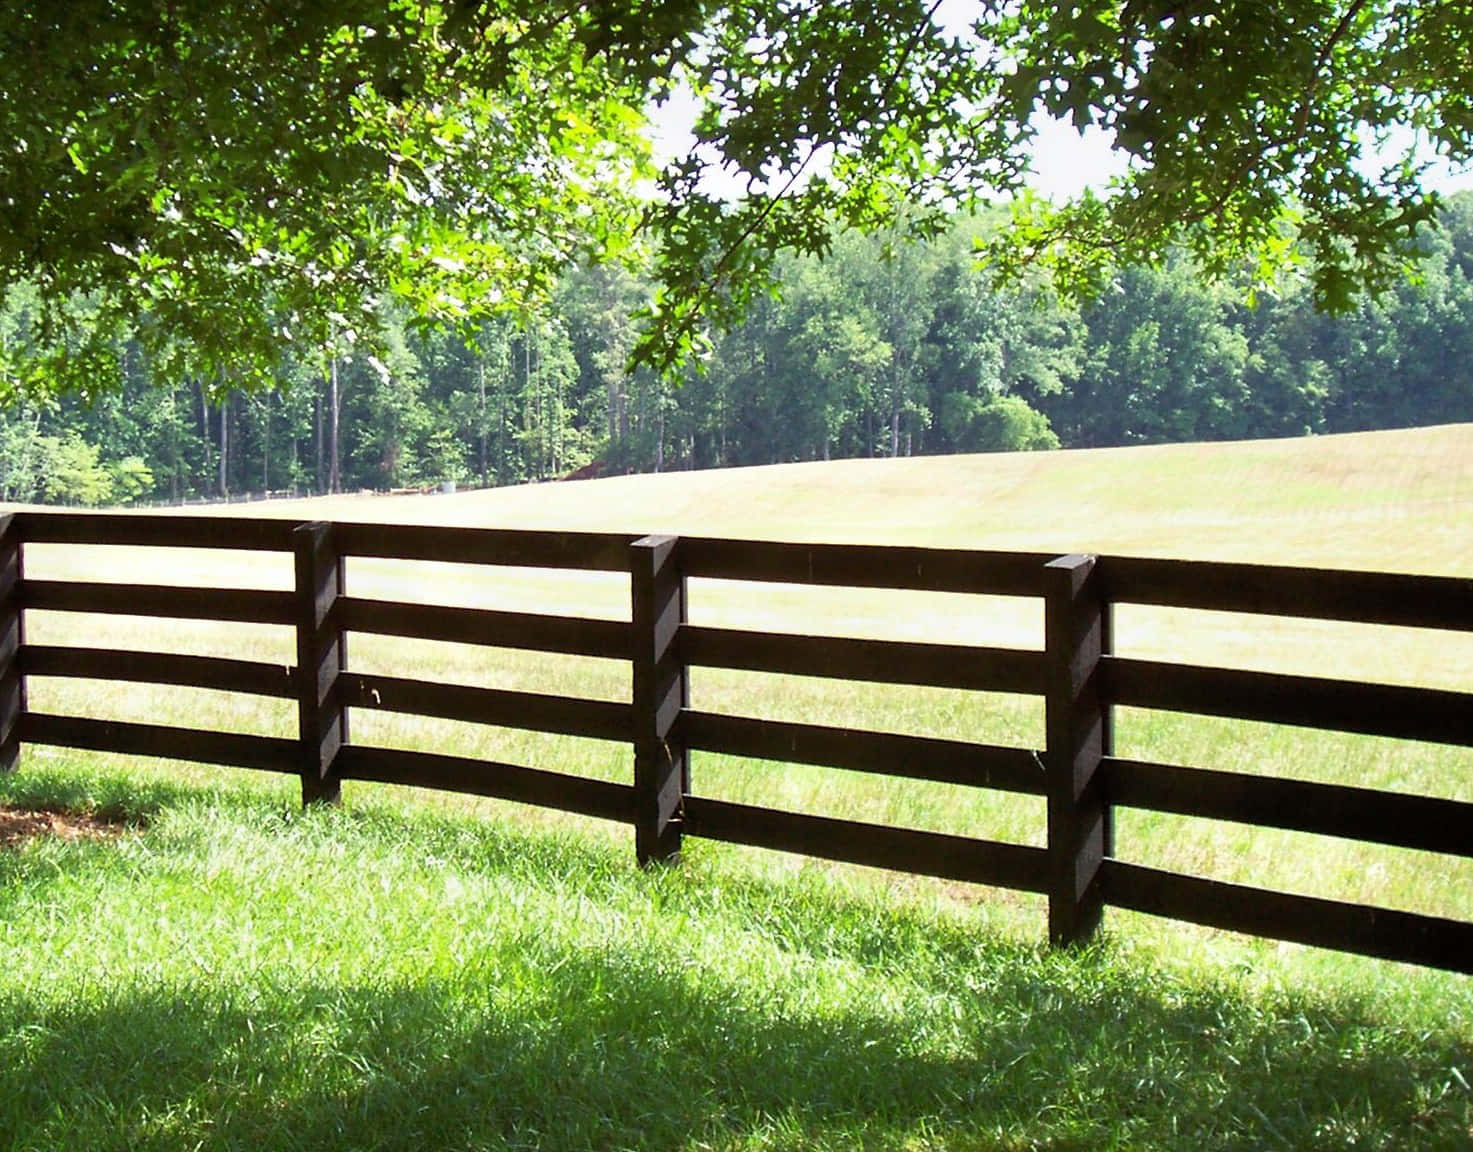 A fence stretching along a grassy field